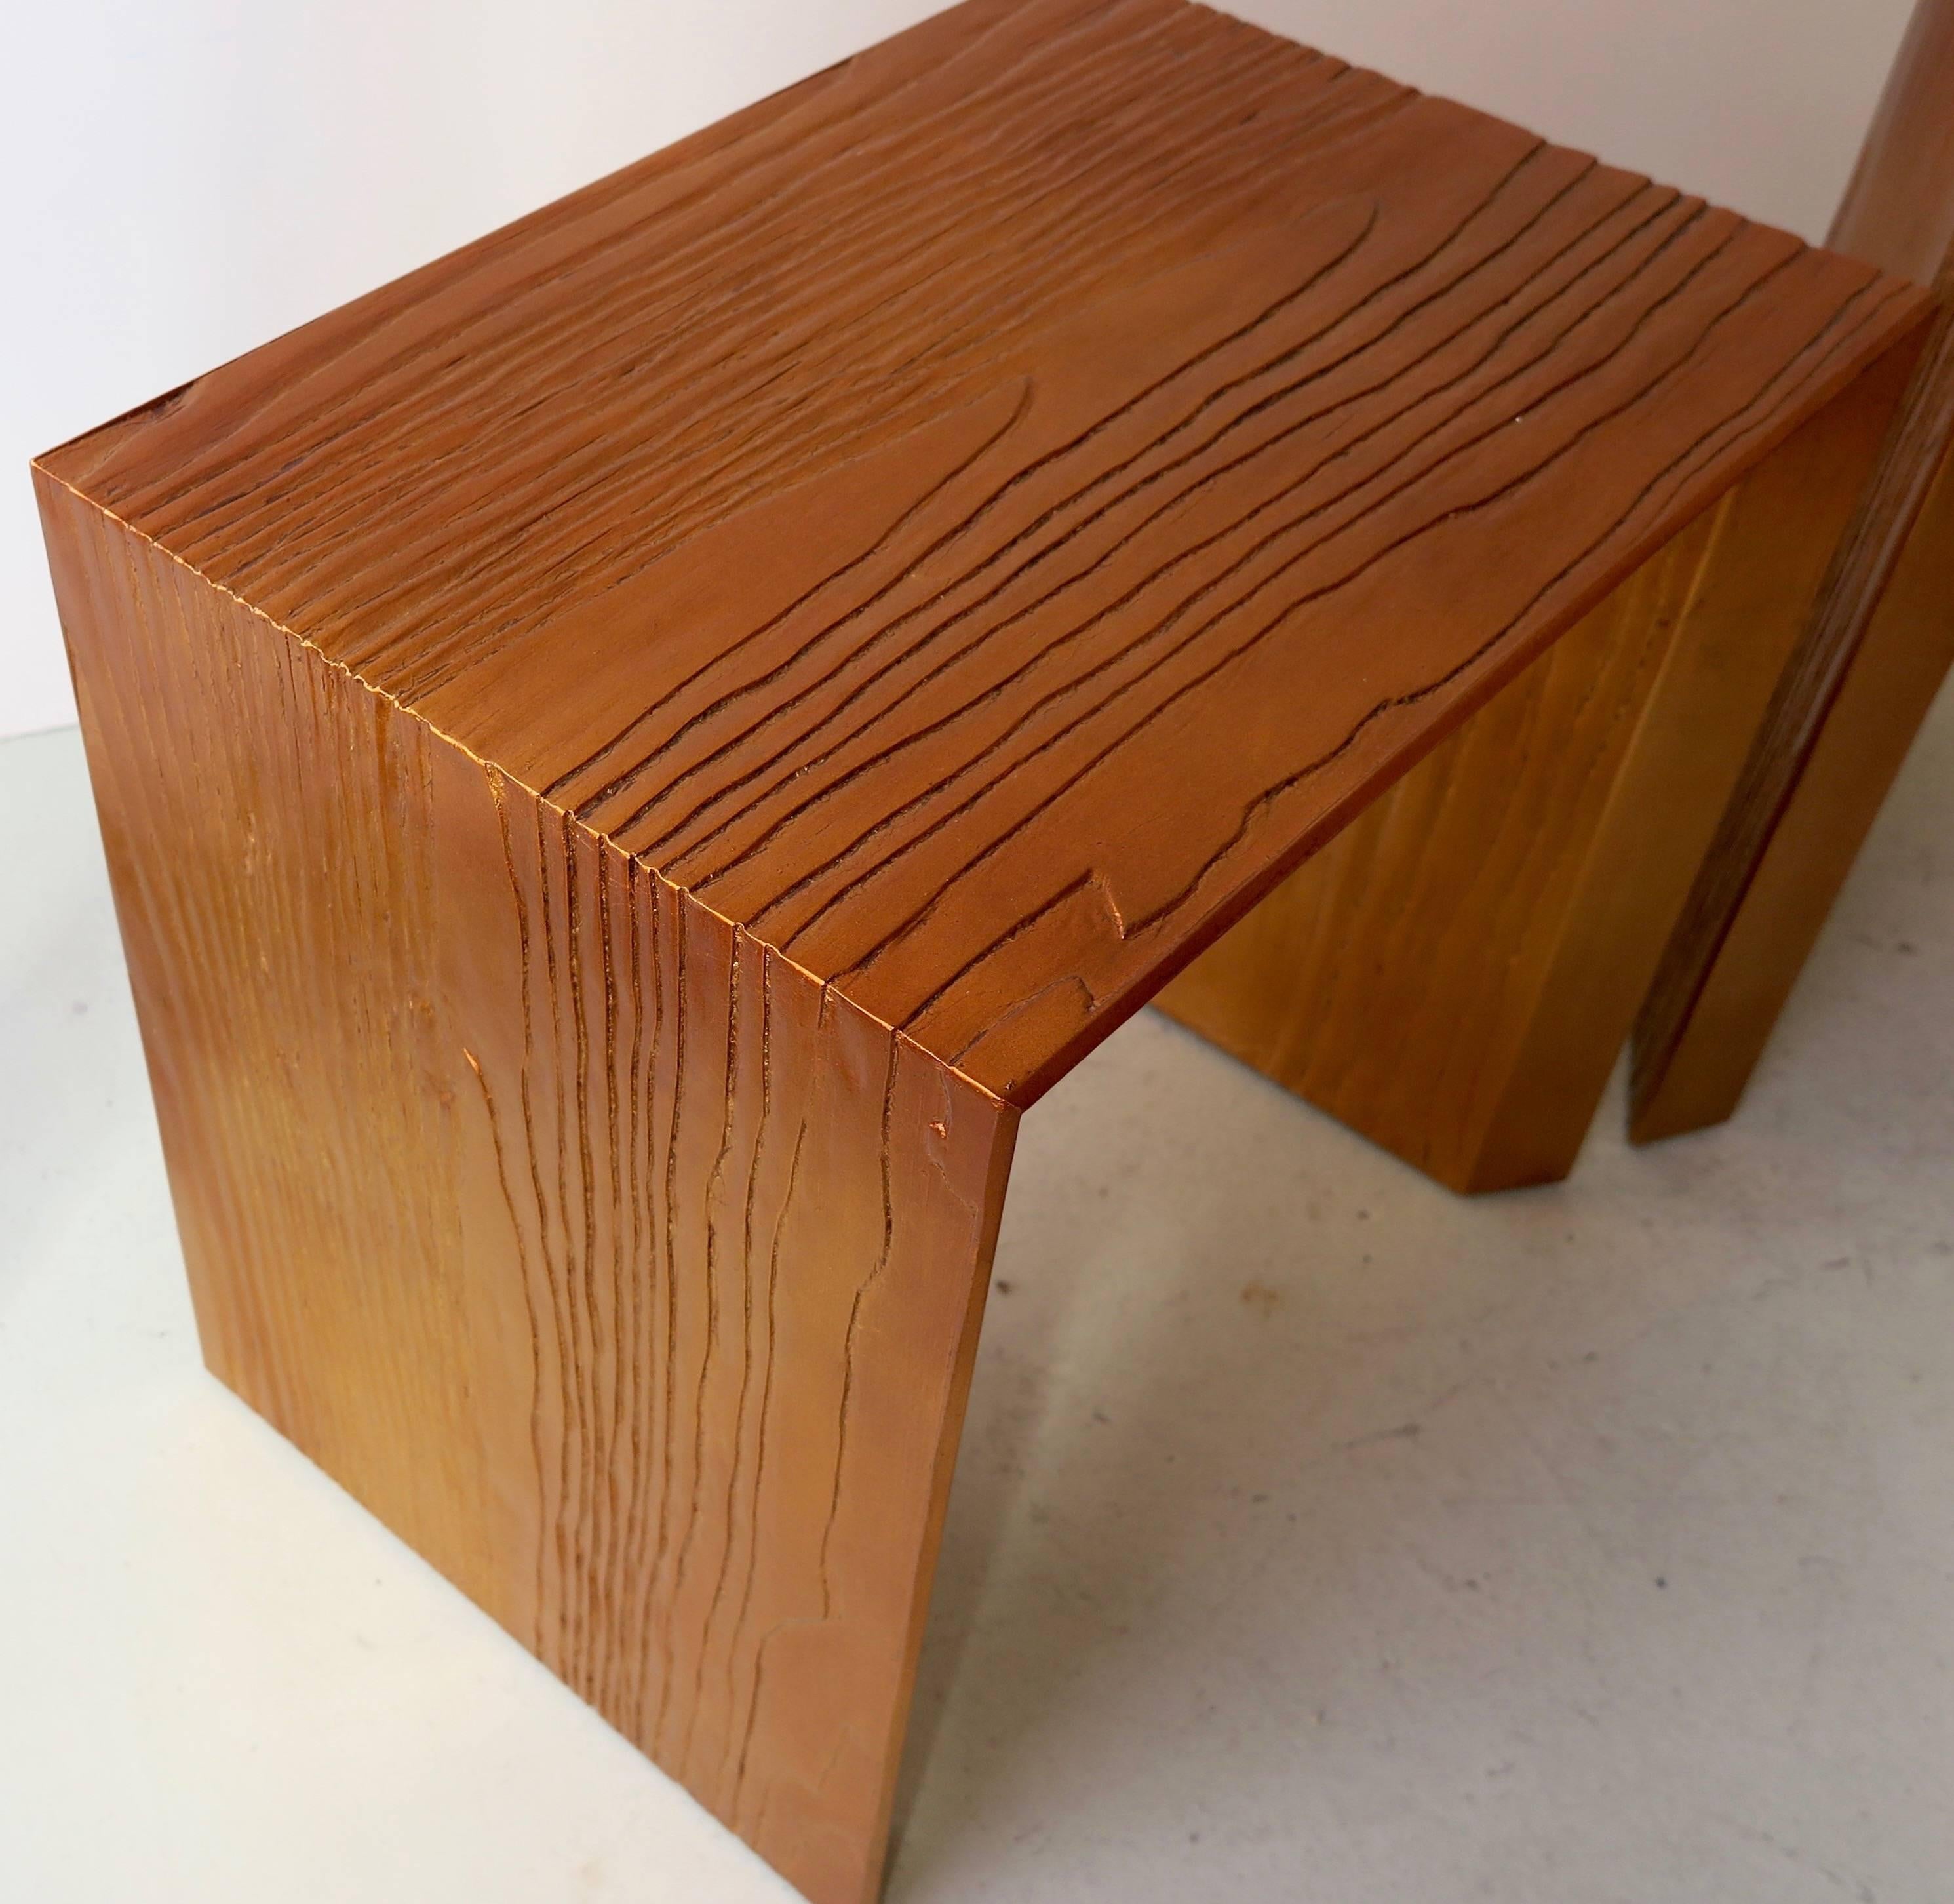 Pair of Custom-Made Side Tables in Copper Shades (amerikanisch)